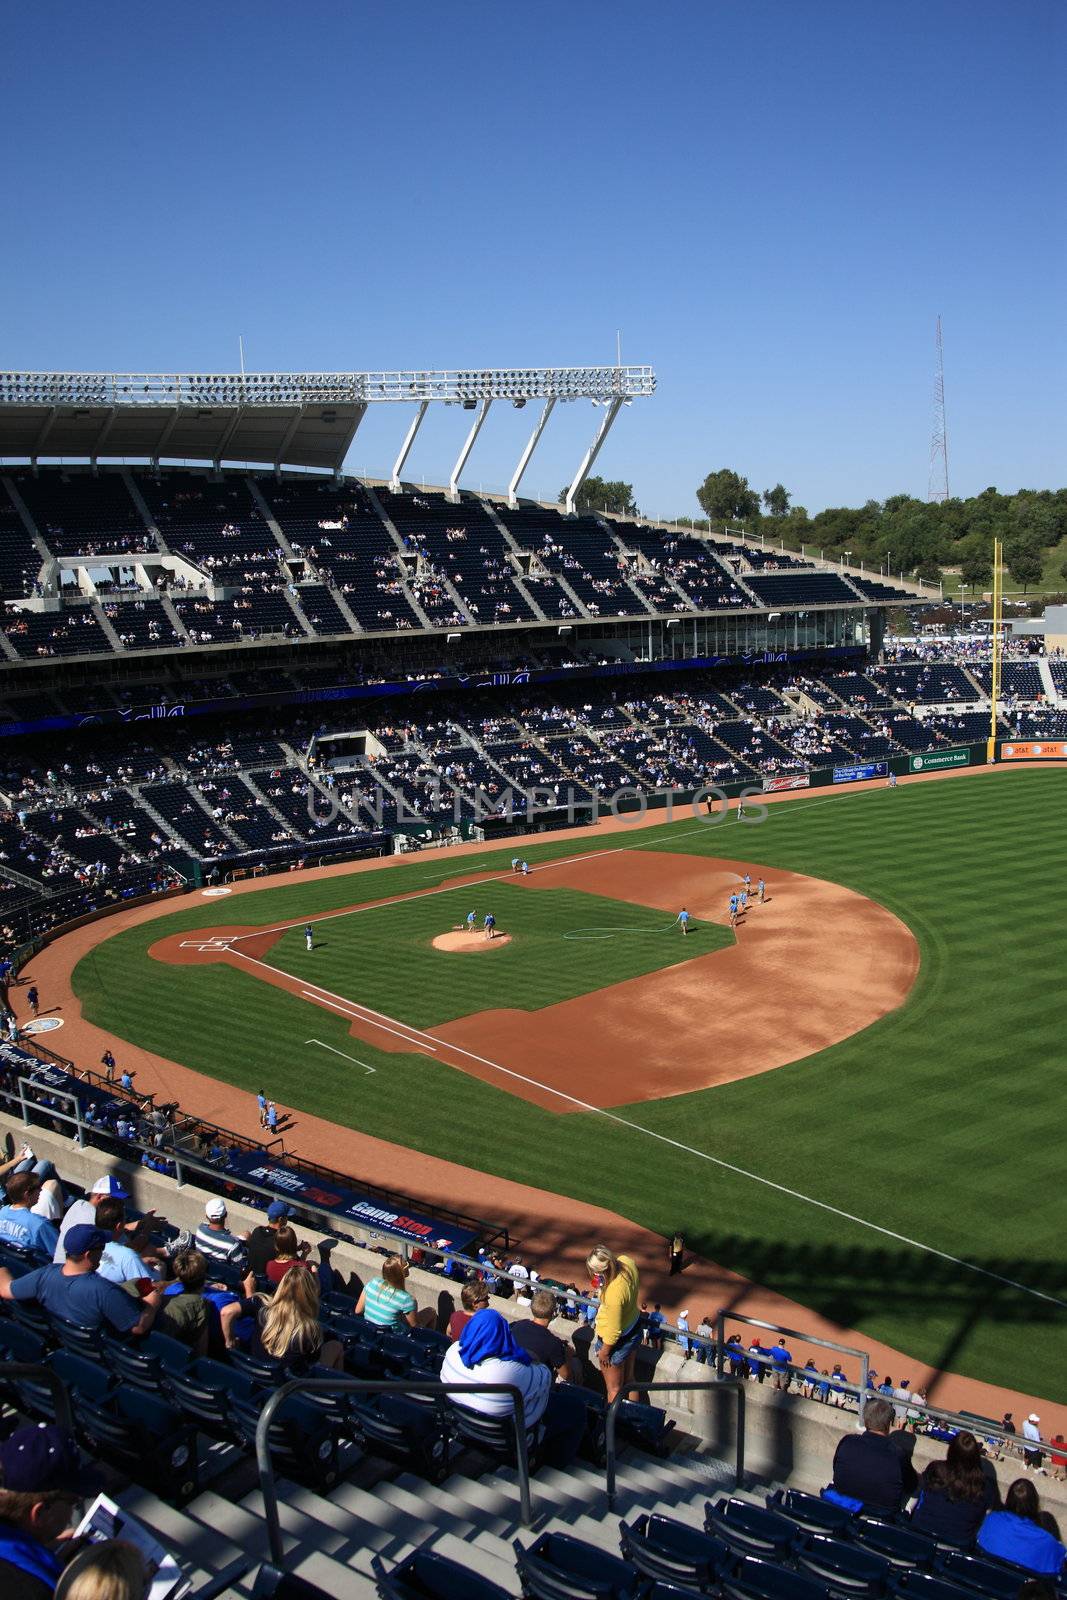 The Royals recently remodeled home ballpark on a sunny afternoon